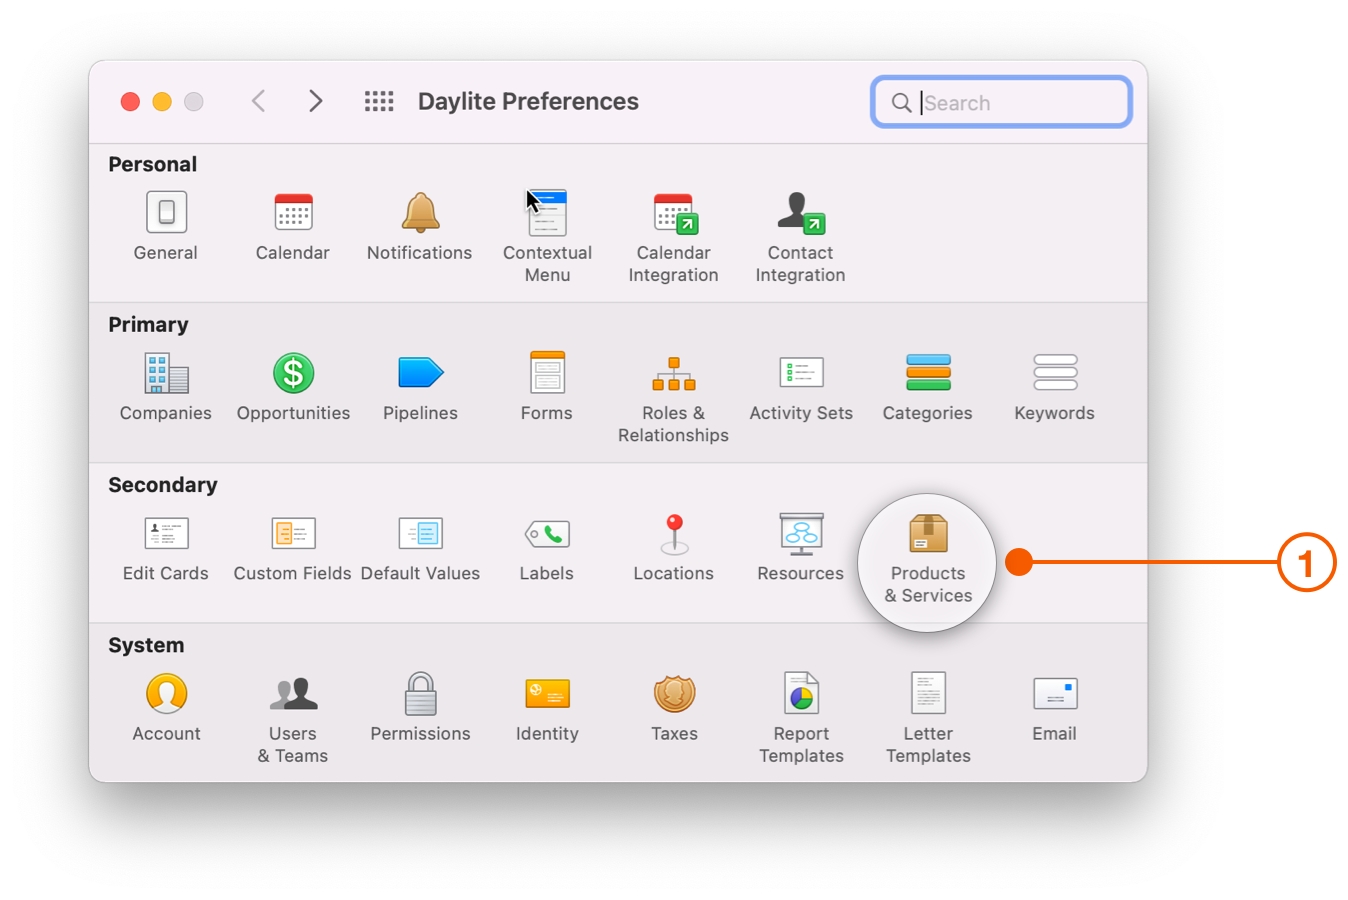 Daylite Preferences screen selecting Products and Services